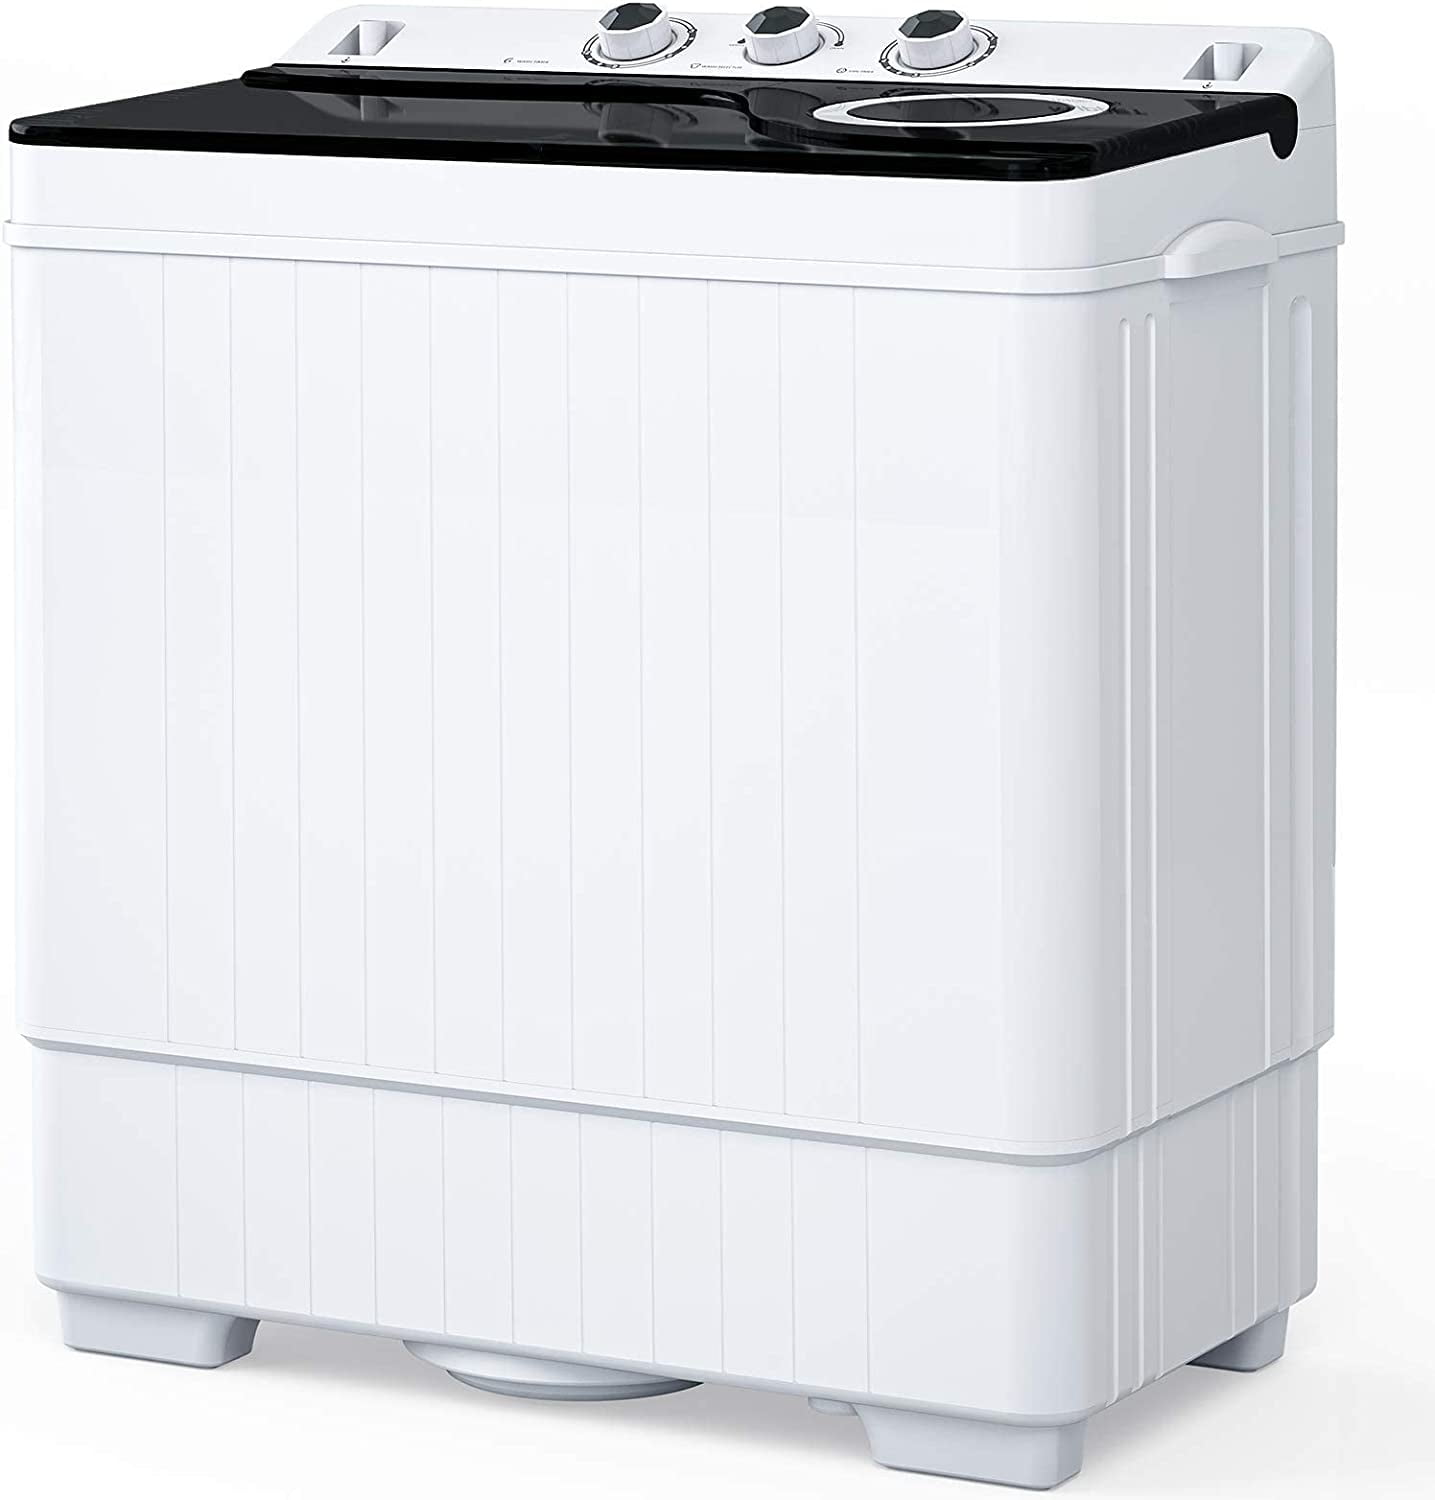 Dalxo 18lbs. Capacity Washer Twin Tub 2.33 cu.ft. Portable Washer & Dryer  Combo Washing Machine in Gray-Black HDABWM1002 - The Home Depot